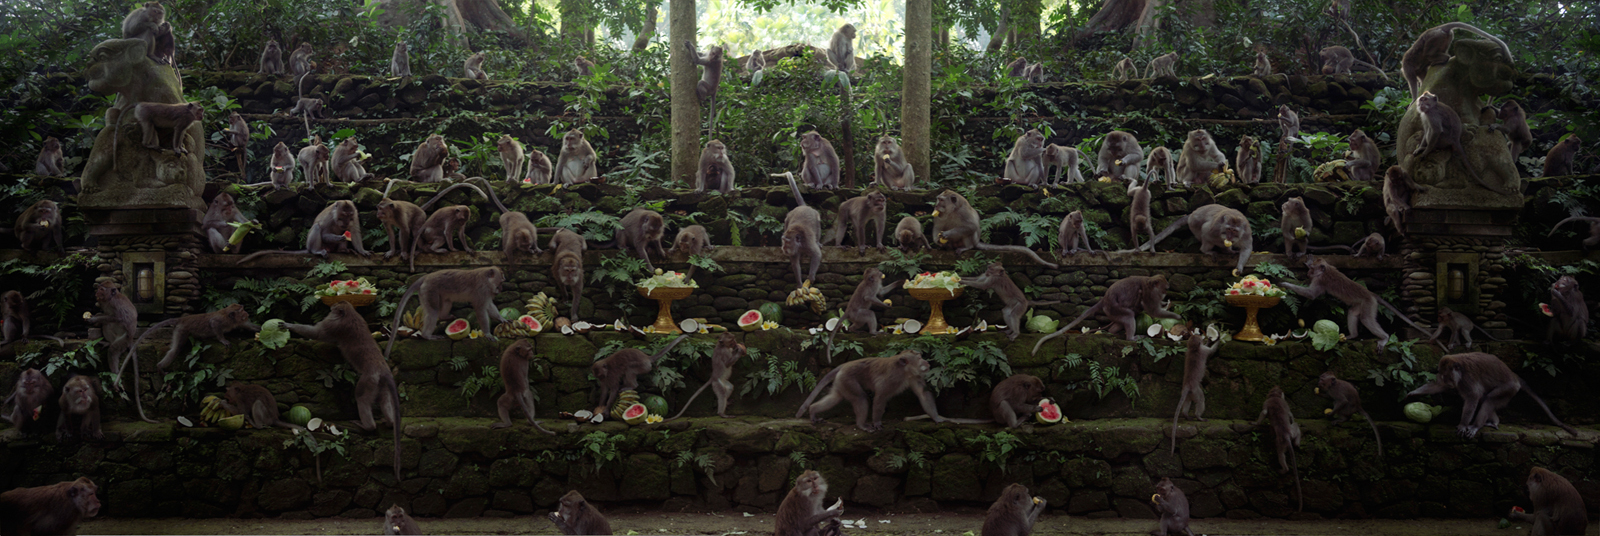  The Long Tailed Macaque Feast  Indonesia, 2015  10”x30” | 20”x60” | 40”x120” 